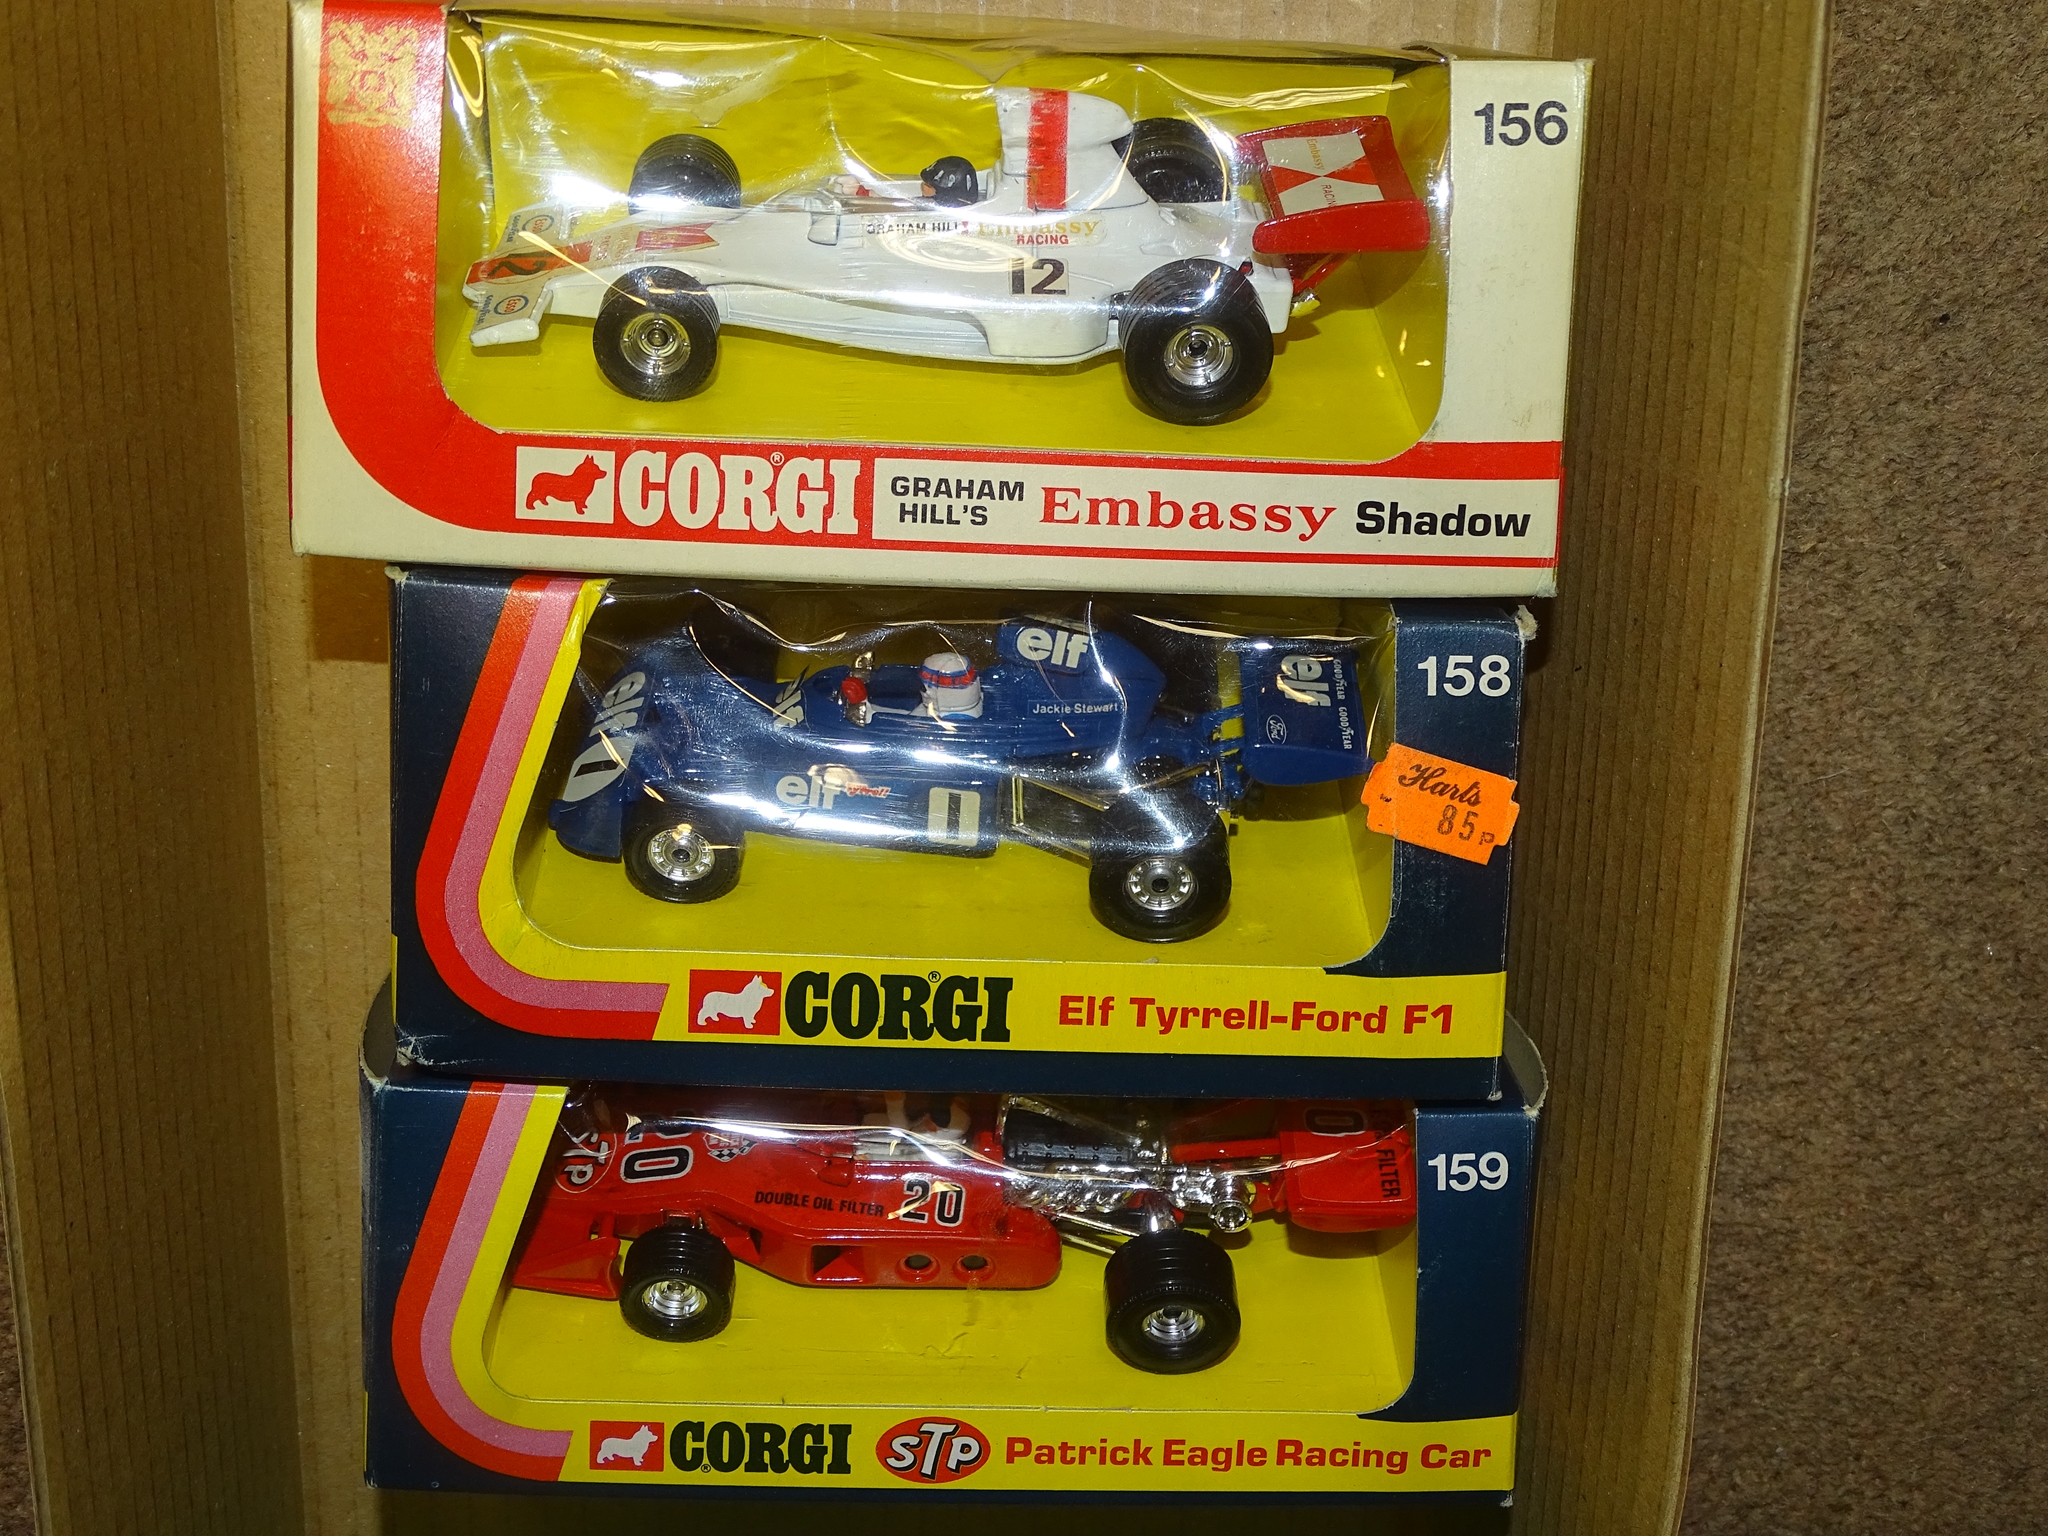 A GROUP OF CORGI FORMULA 1 RACING CARS to include 156 GRAHAM HILL'S EMBASSY SHADOW, 158 ELF